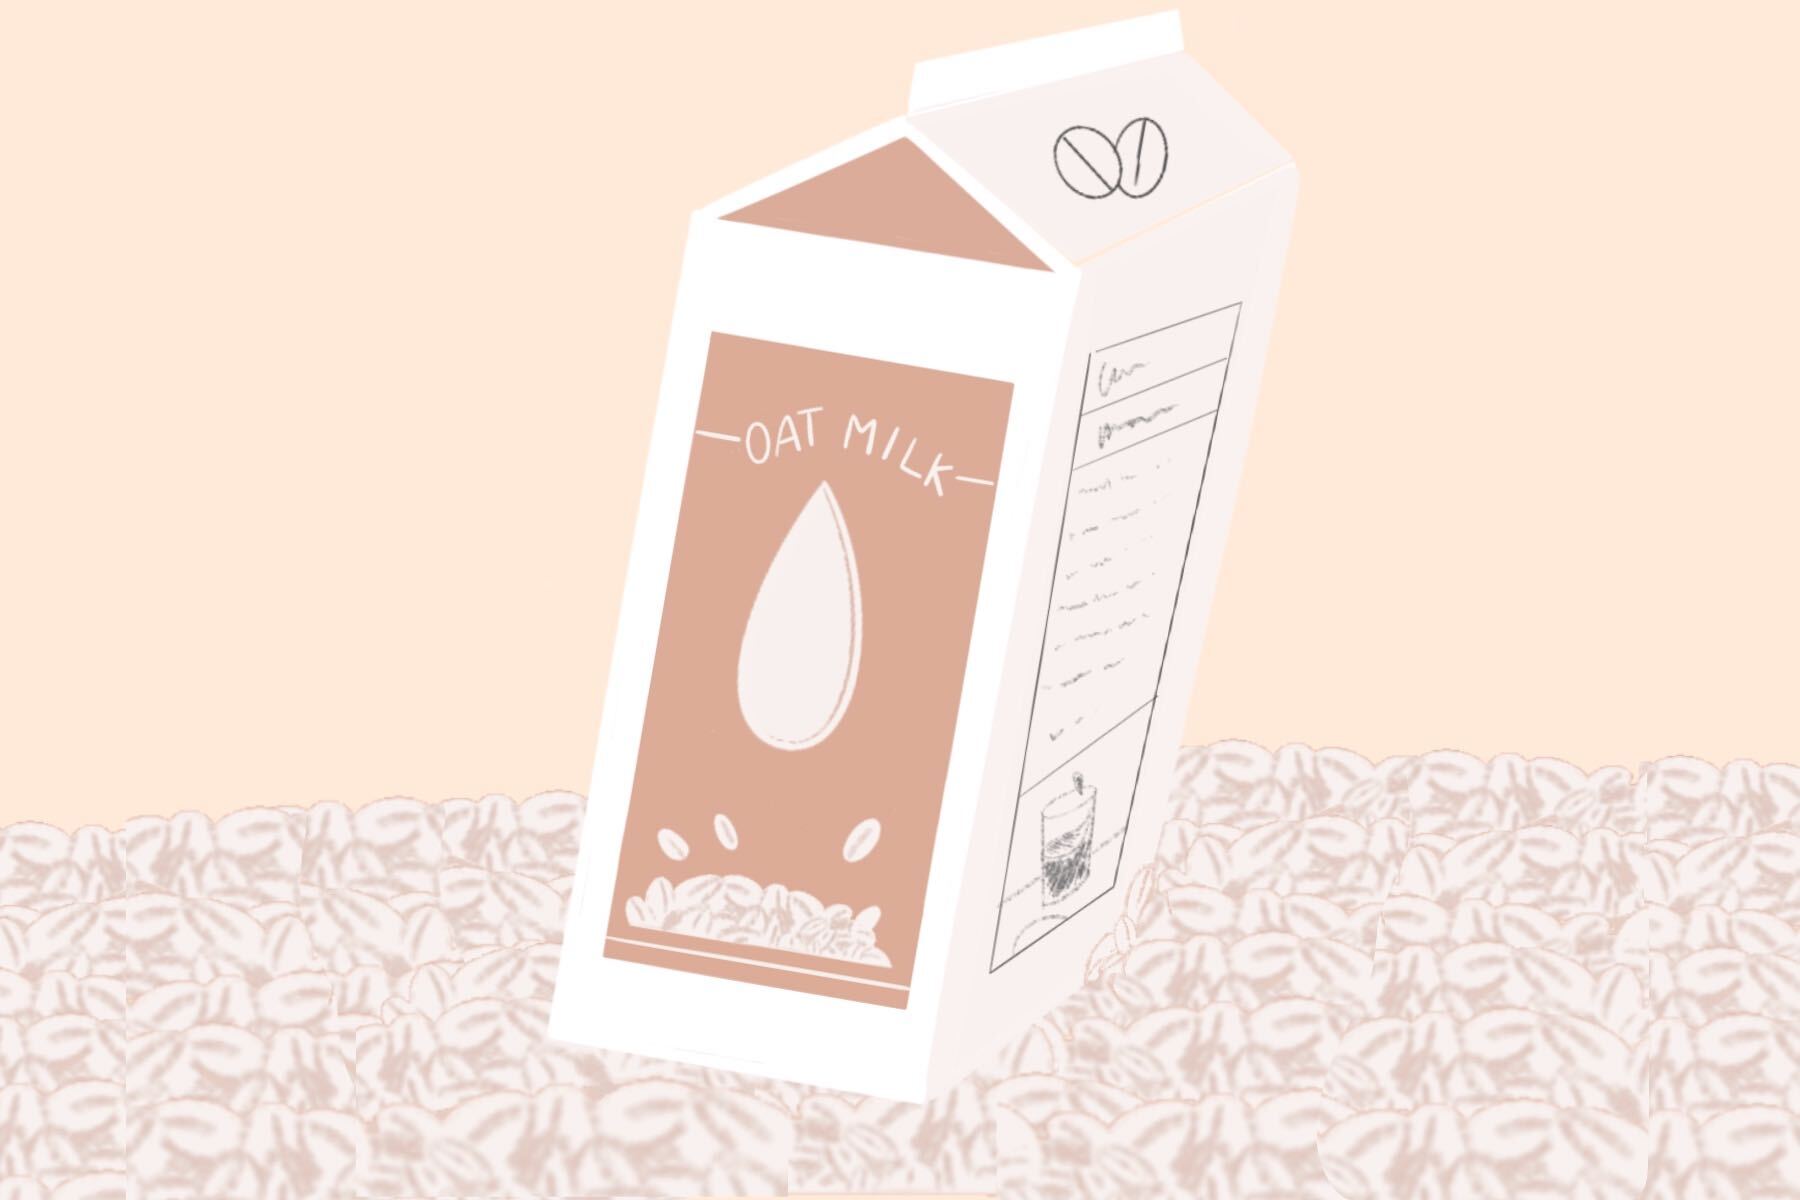 Oat milk cartons can be found in most grocery stores.